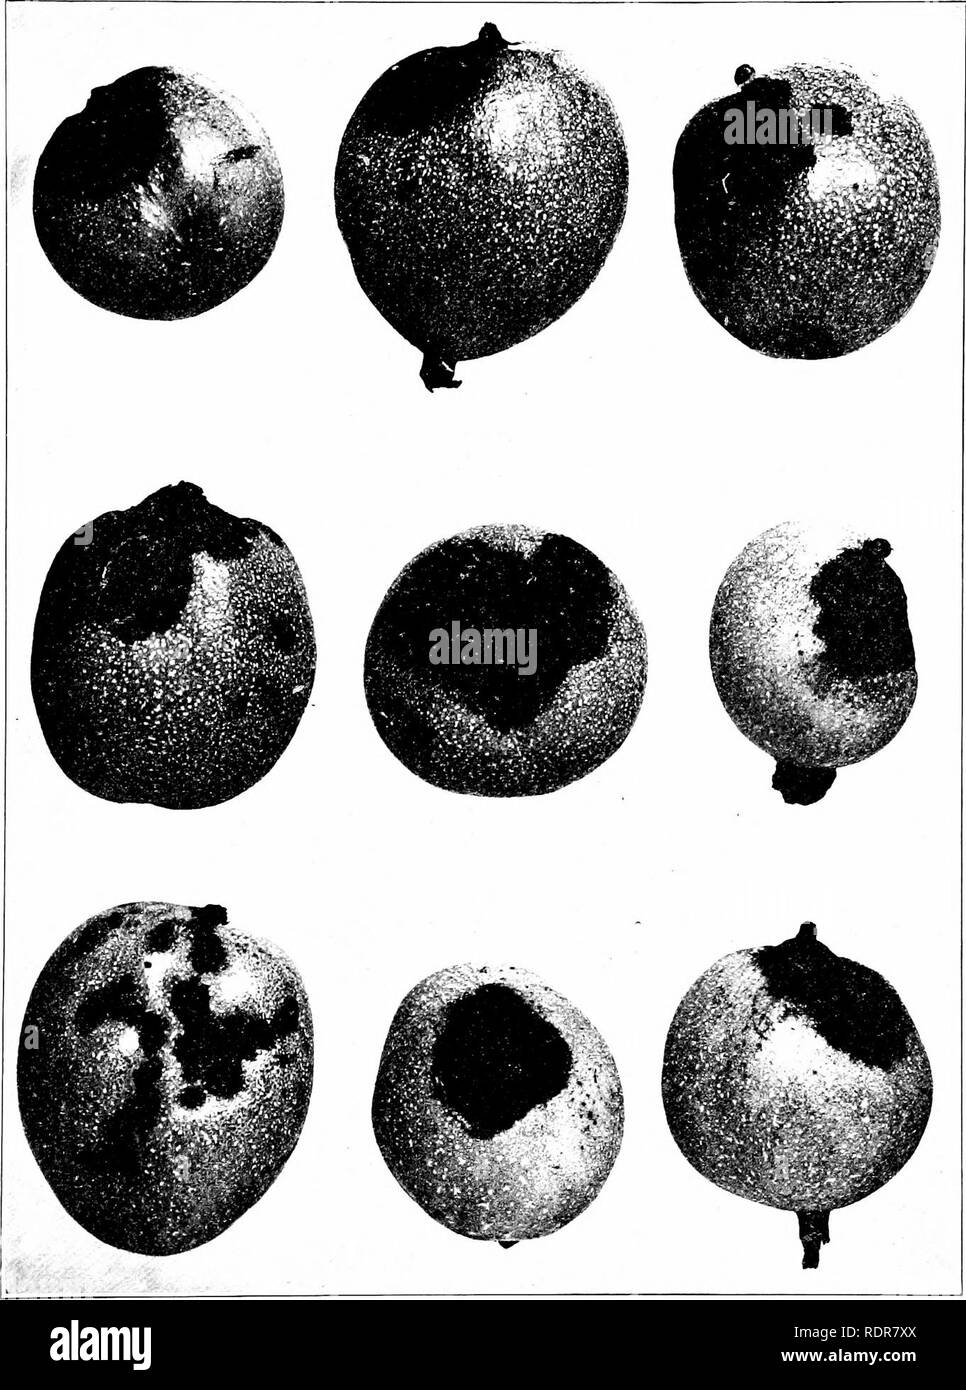 . Bacteria in relation to plant diseases. Bacteriology; Plant diseases. PLATE 2]. Walnut disease. Bacterial black spot of the Persian walnut (Juglans regia). more commonly known as the English walnut. Half-developed green h-uits from an orchard in California, showing the badly spotted epicarp ; spots due to Bacterium juglandis (Pierce). Leaves and shoots are also subject to this disease, which has become serious in Southern California, where large quantities of these nuts are grown for market. The attacked parts are conspicuously blackened as if charred. The numerous small white spots show the Stock Photo